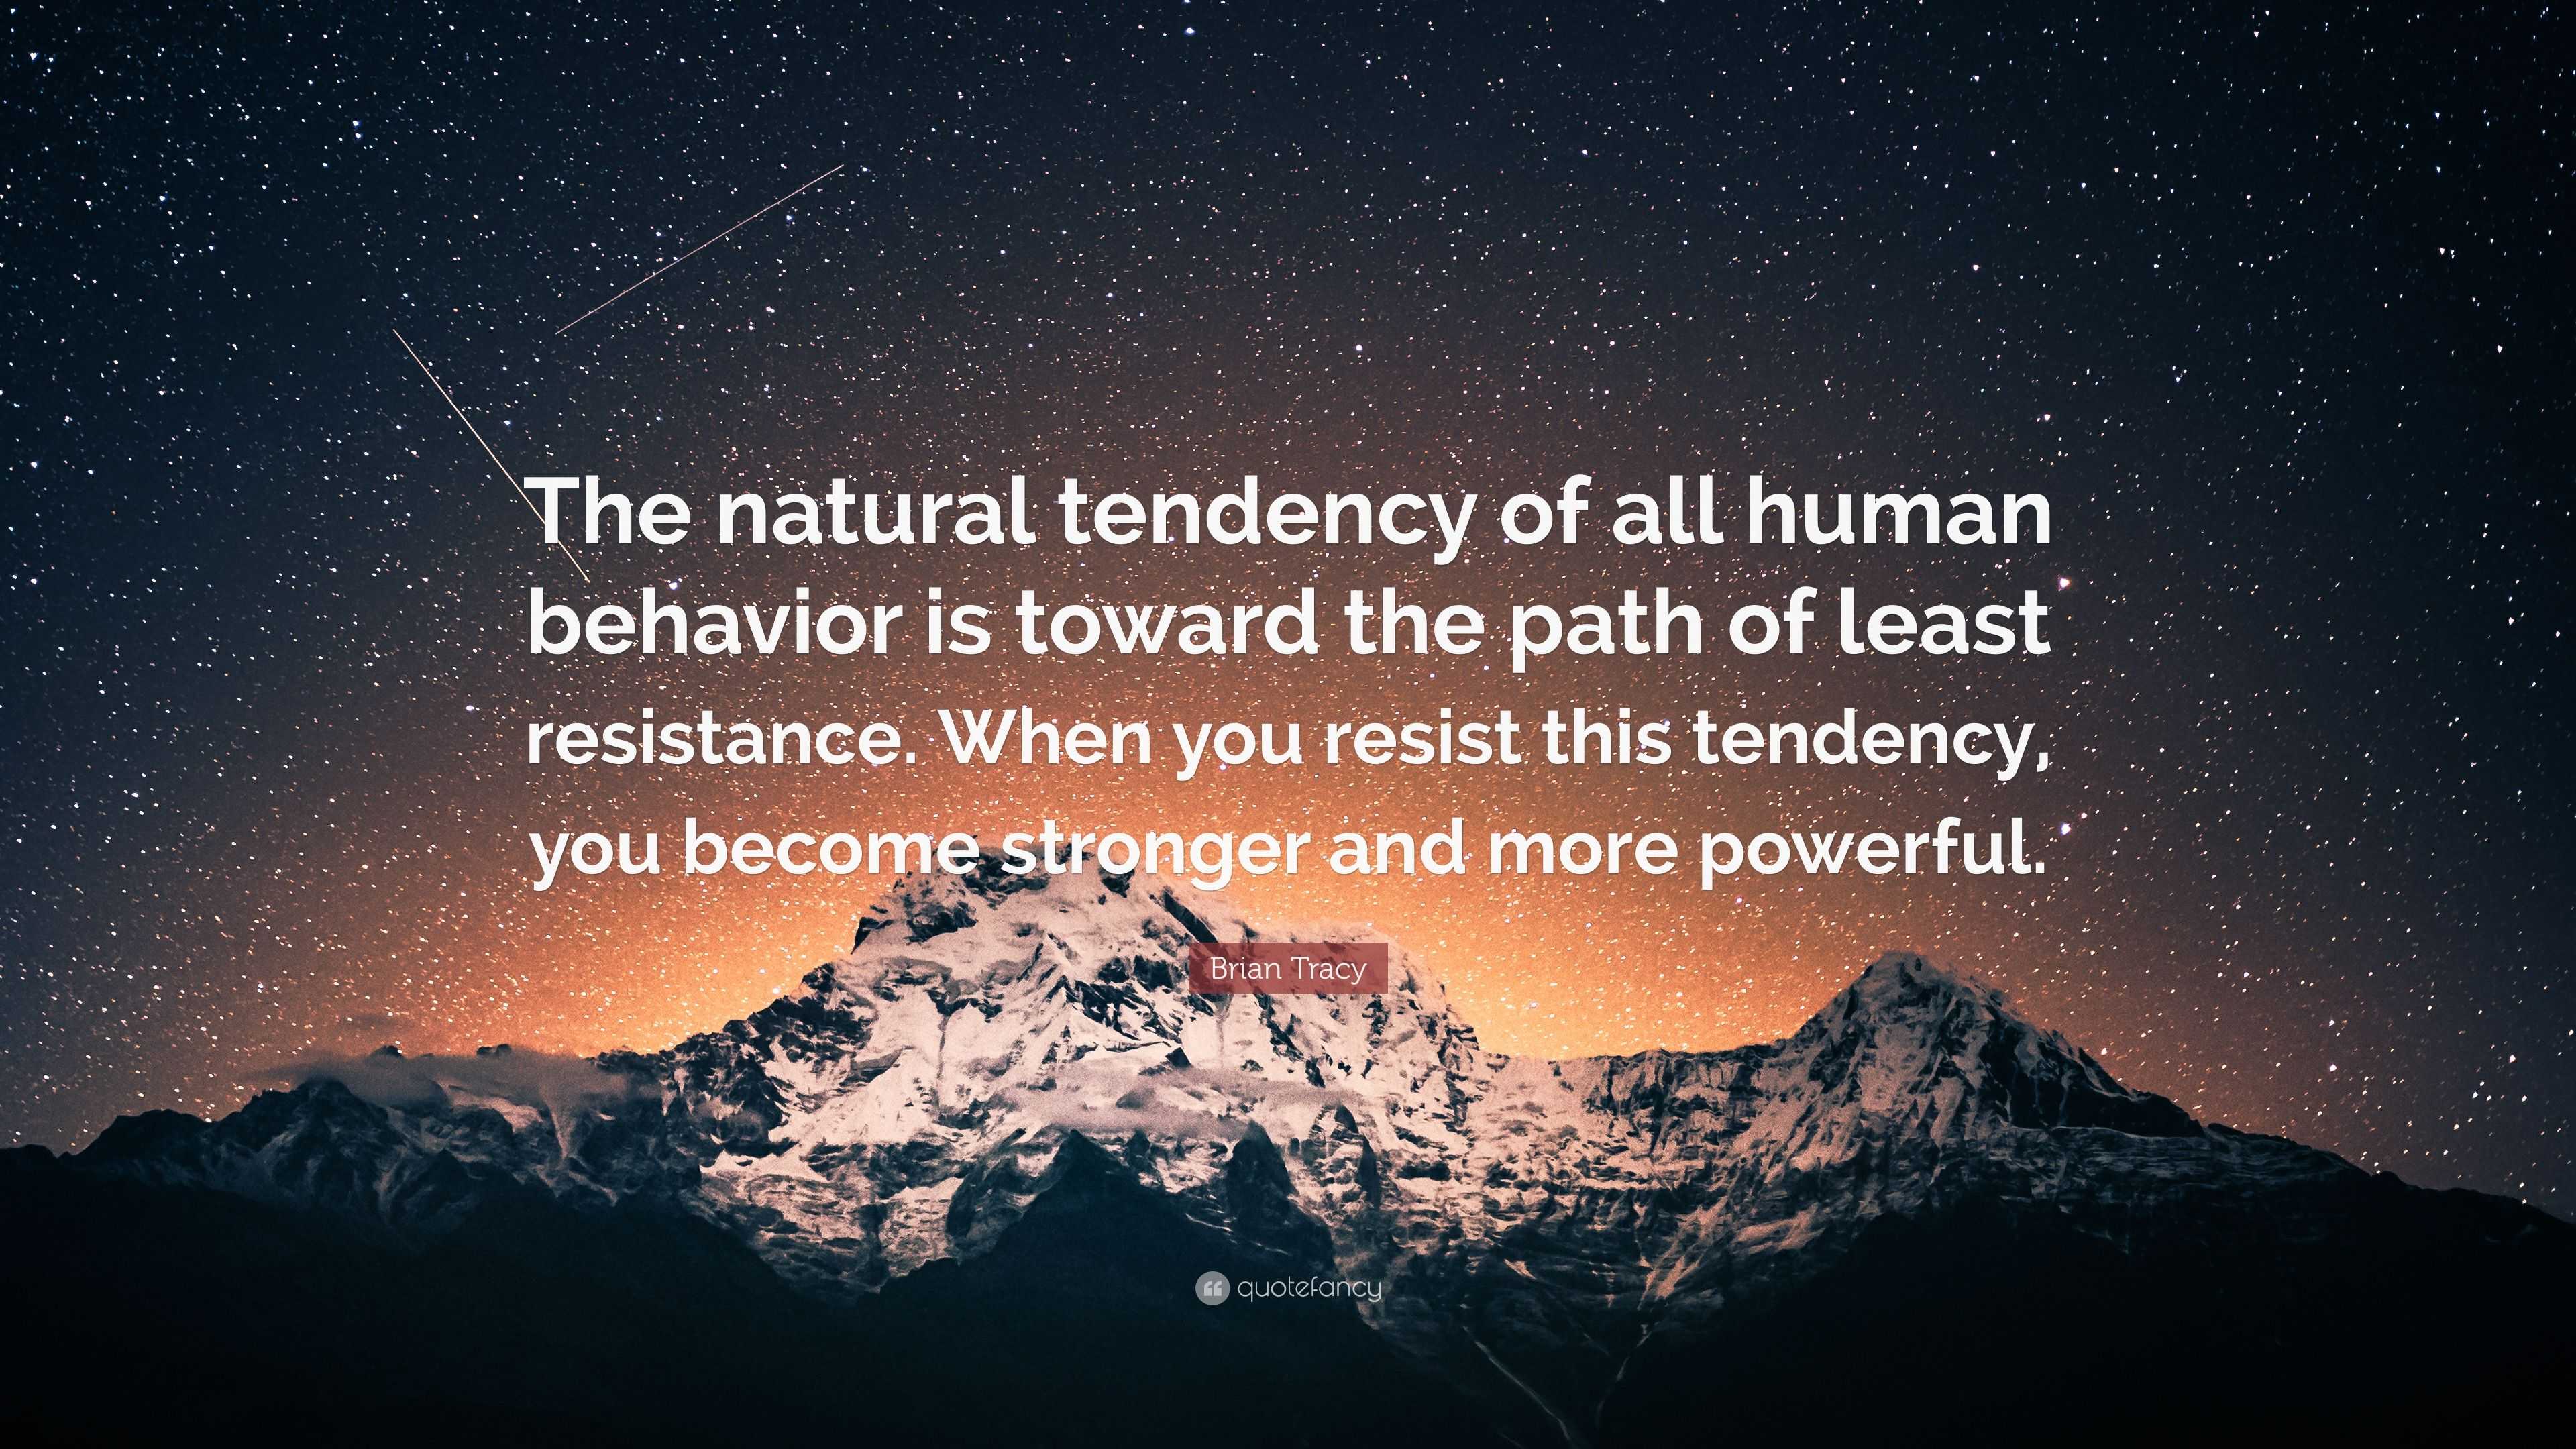 Brian Tracy Quote: “The natural tendency of all human behavior is ...